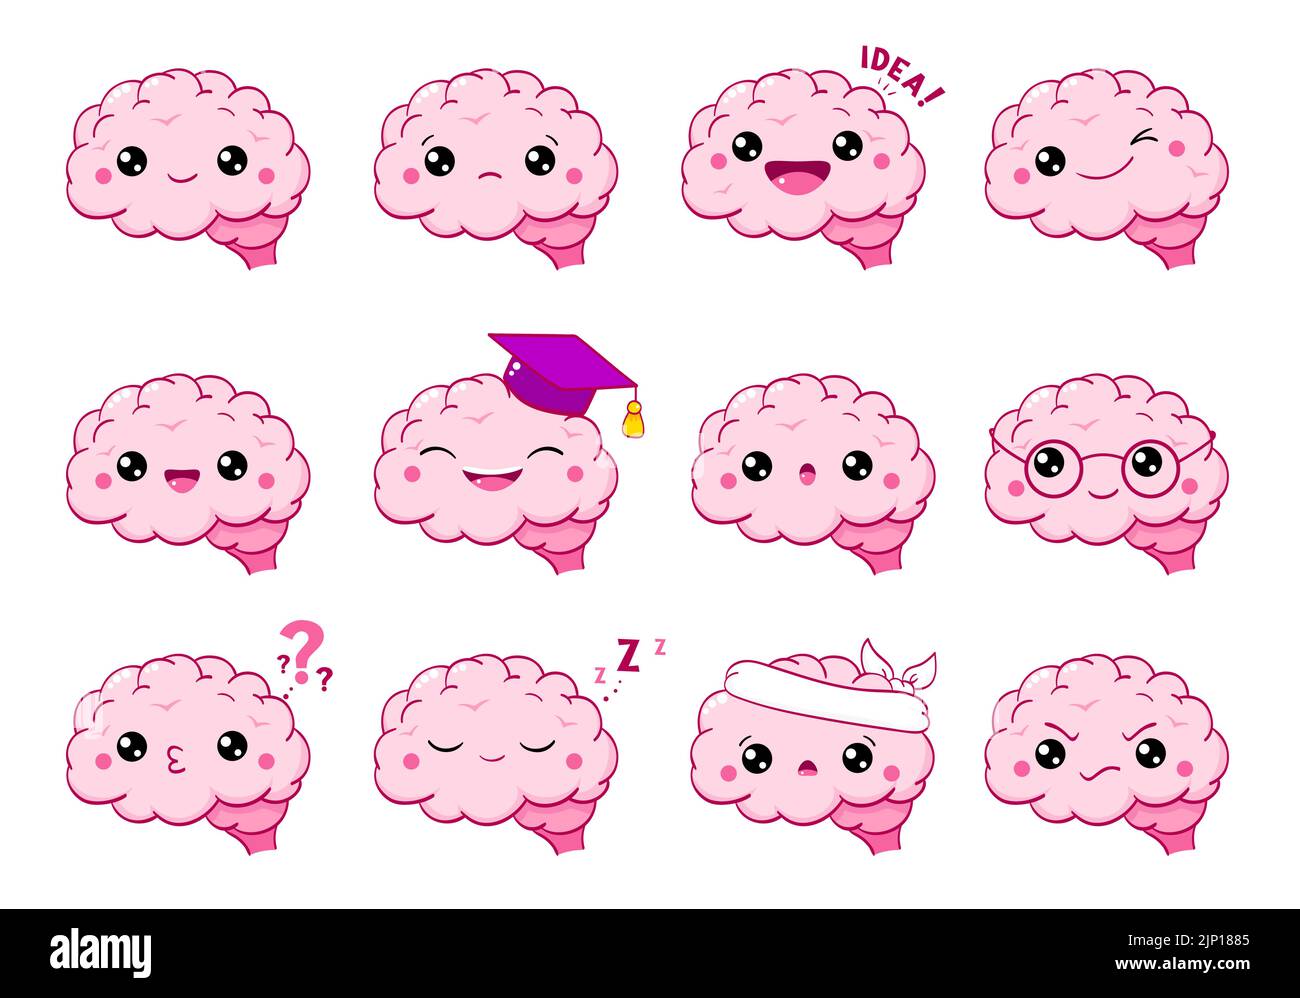 Set of Kawaii Brain Cartoon Character. Collection of human brains with different mood. Set of brainy characters in different expressions - happy, sad, Stock Vector